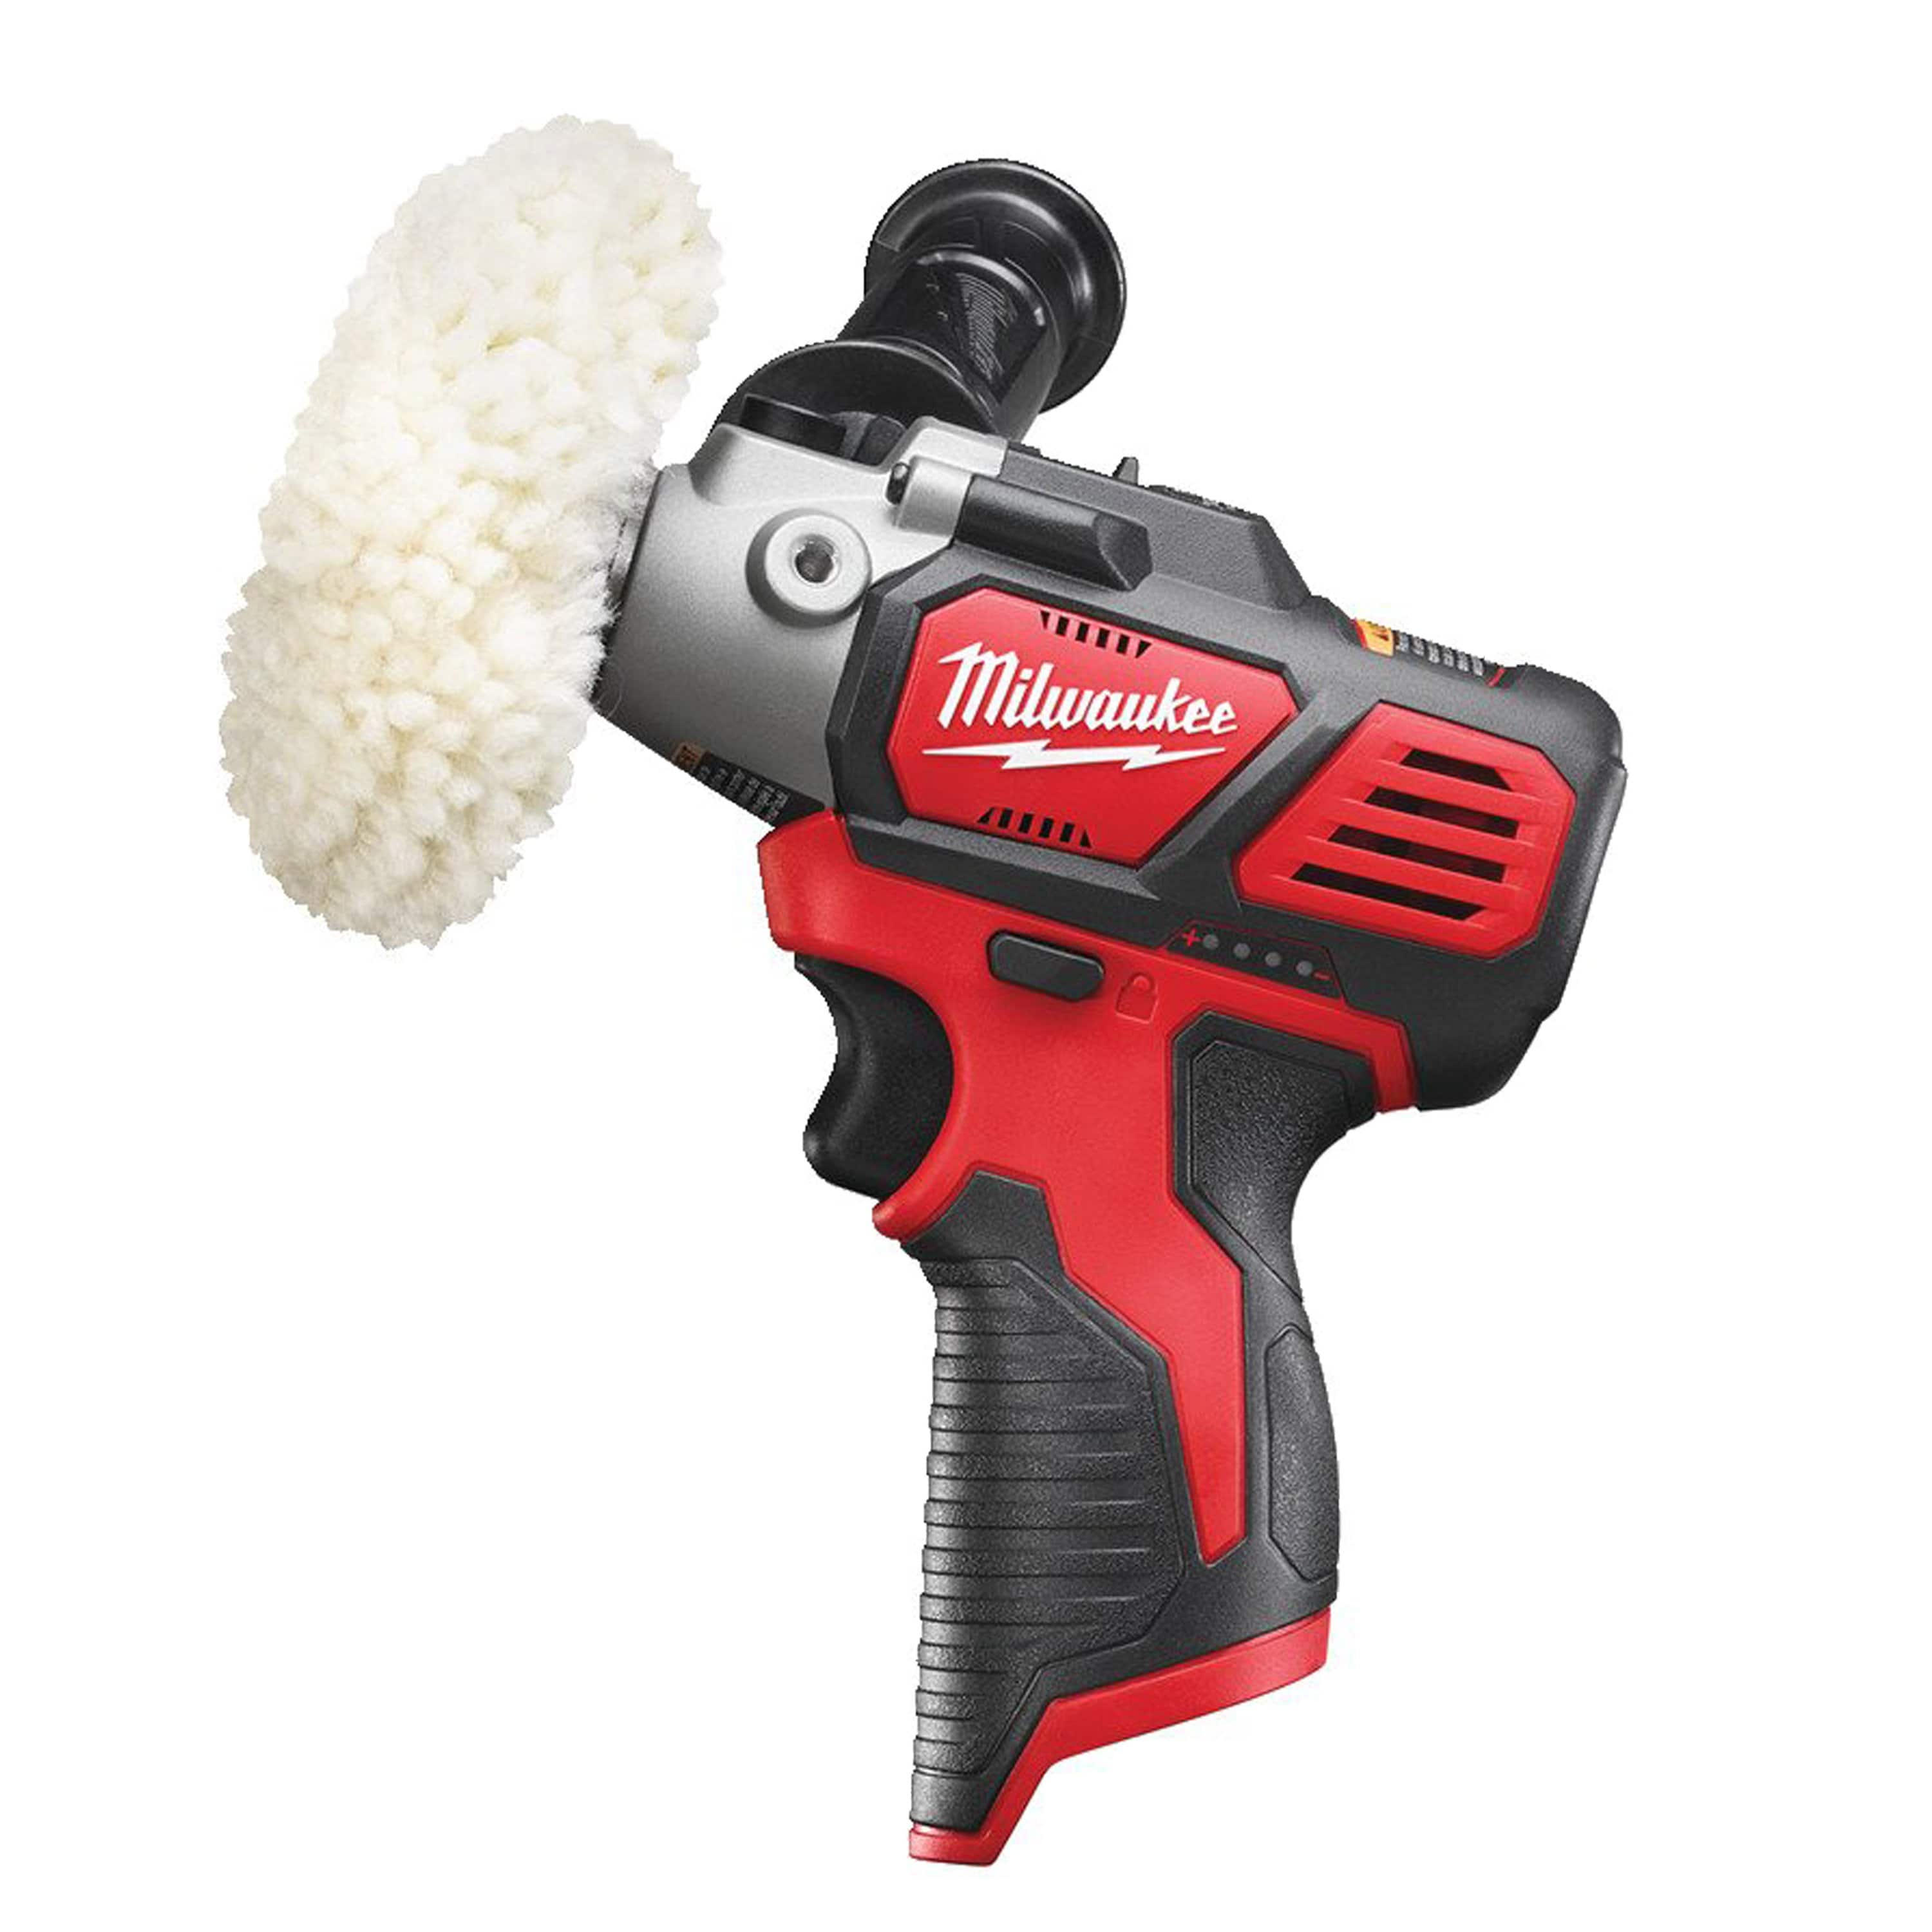 Milwaukee M12™ Cordless Sub Compact ½″ Impact Wrench 12V - M12 BIW12-202C | Supply Master | Accra, Ghana Tools Building Steel Engineering Hardware tool